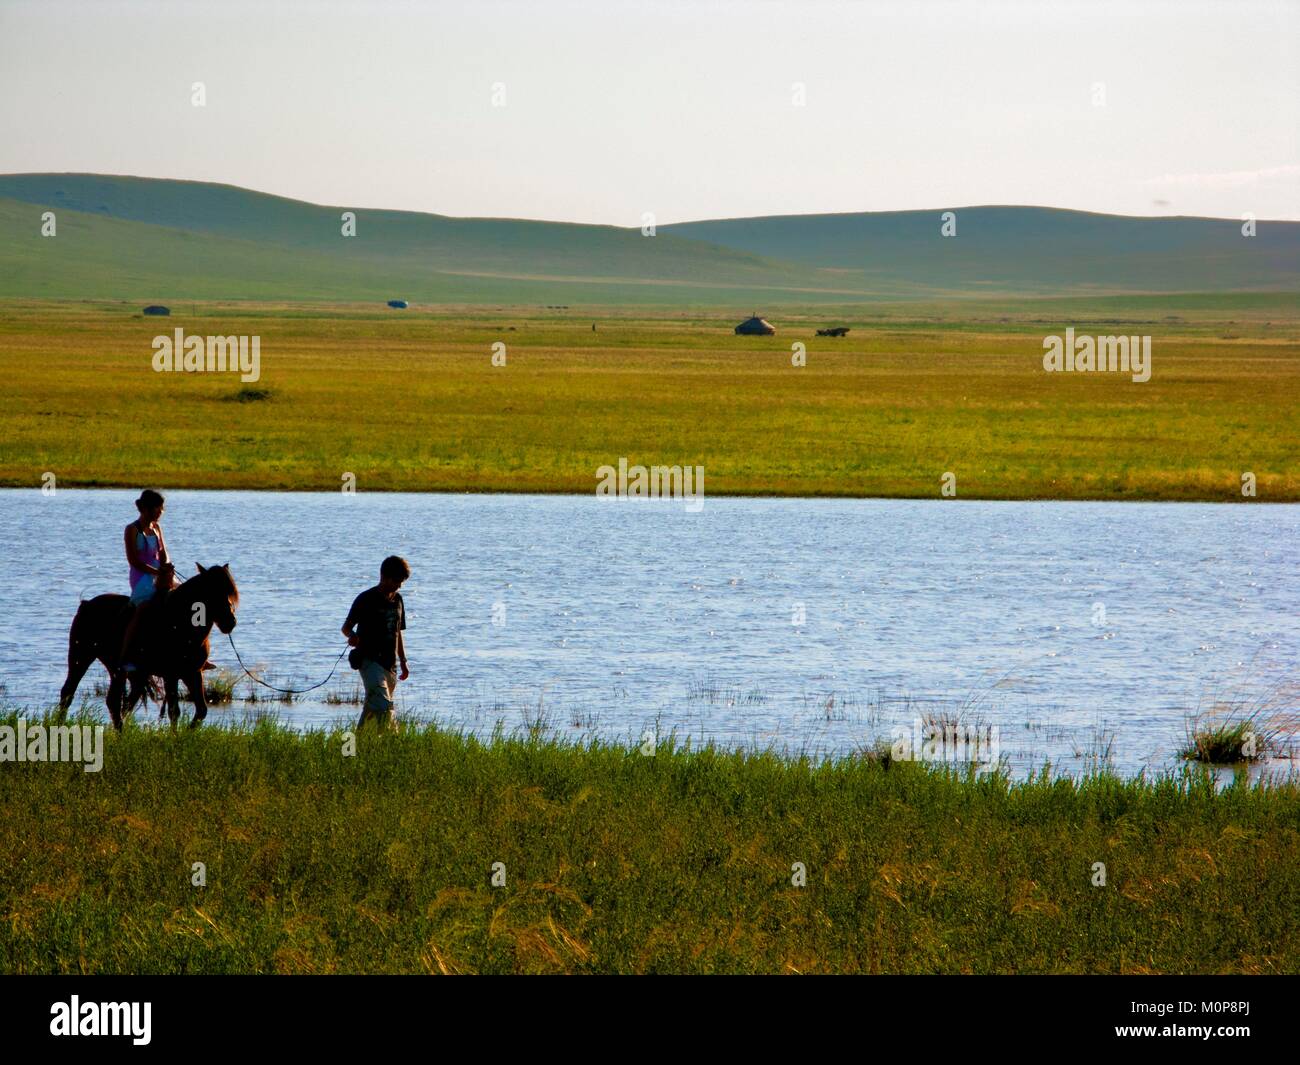 China,Inner Mongolia,20 kilometers west of the town of Ujimqin,central place for the Mongolian nomadic tribes,Mongolian horseback ride,a small but robust and domesticated animal,specific to the region Stock Photo